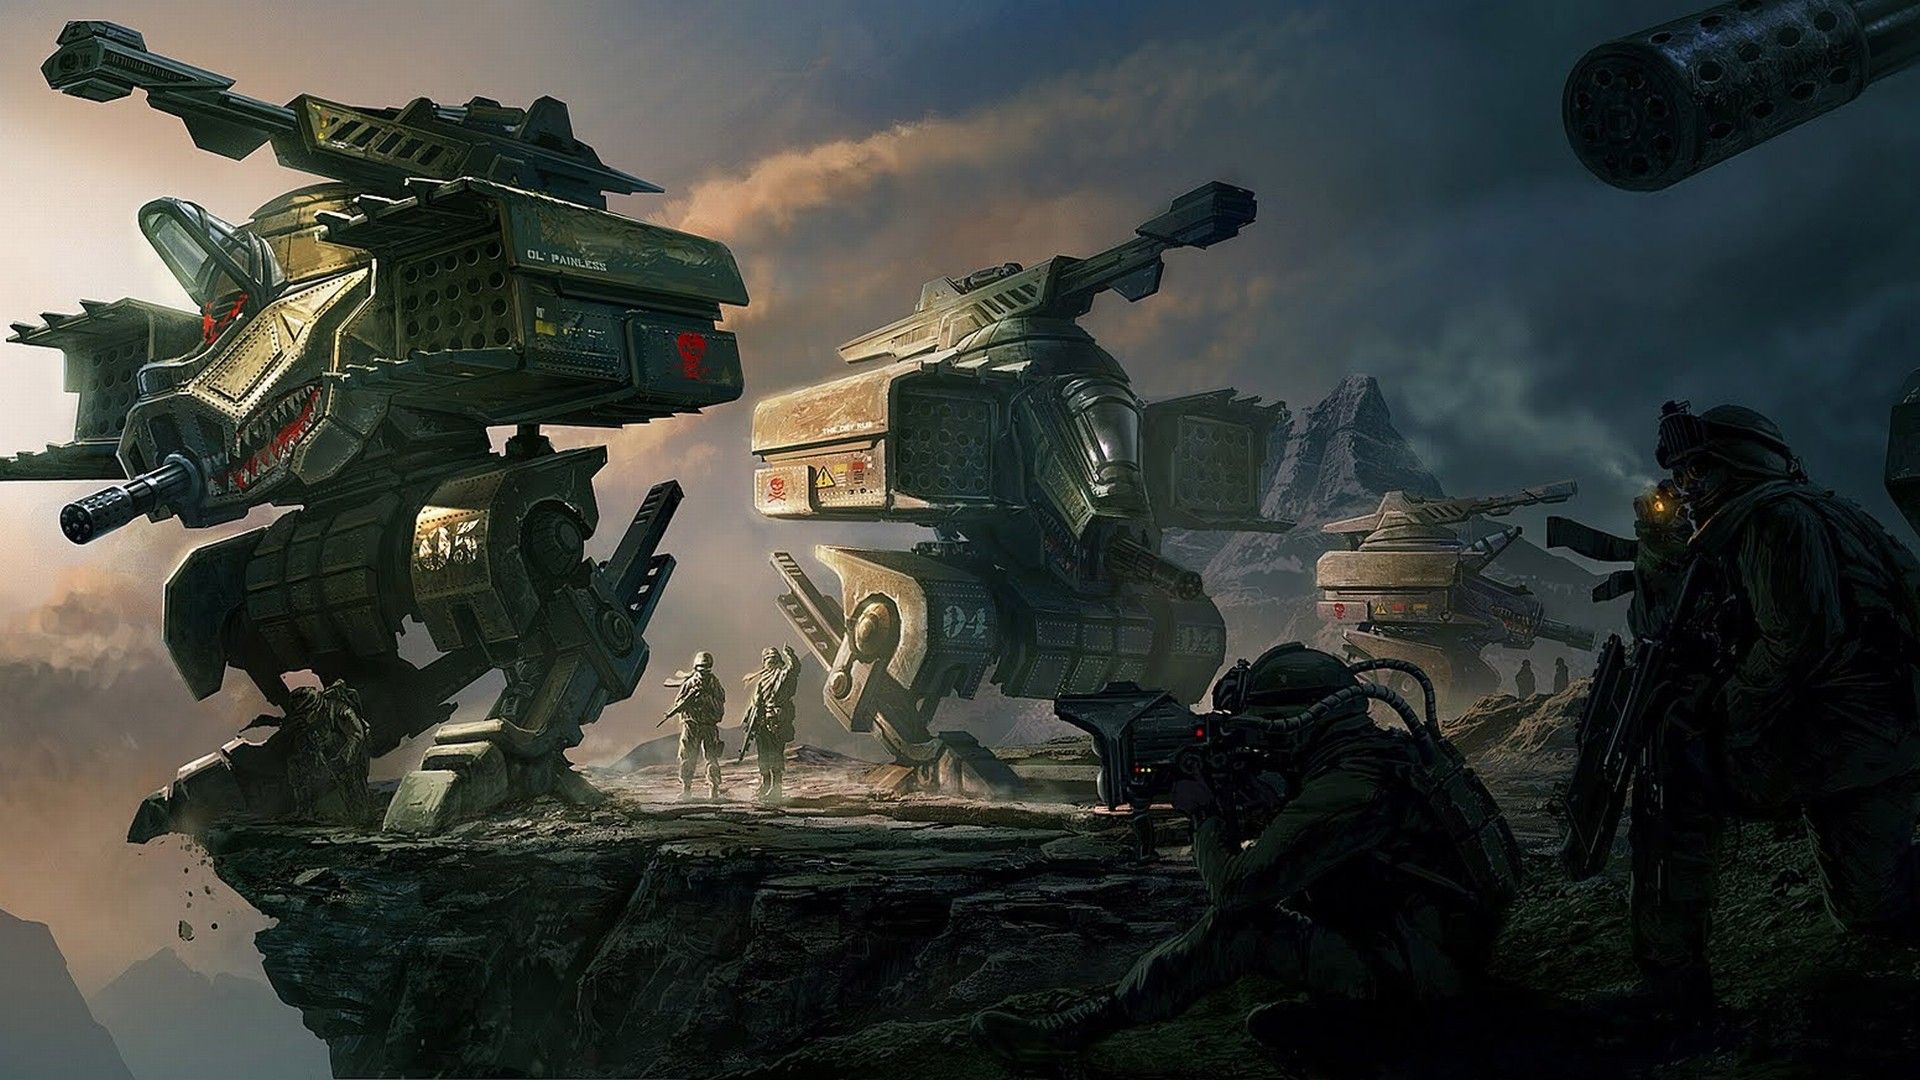 Military robots wallpaper and image, picture, photo